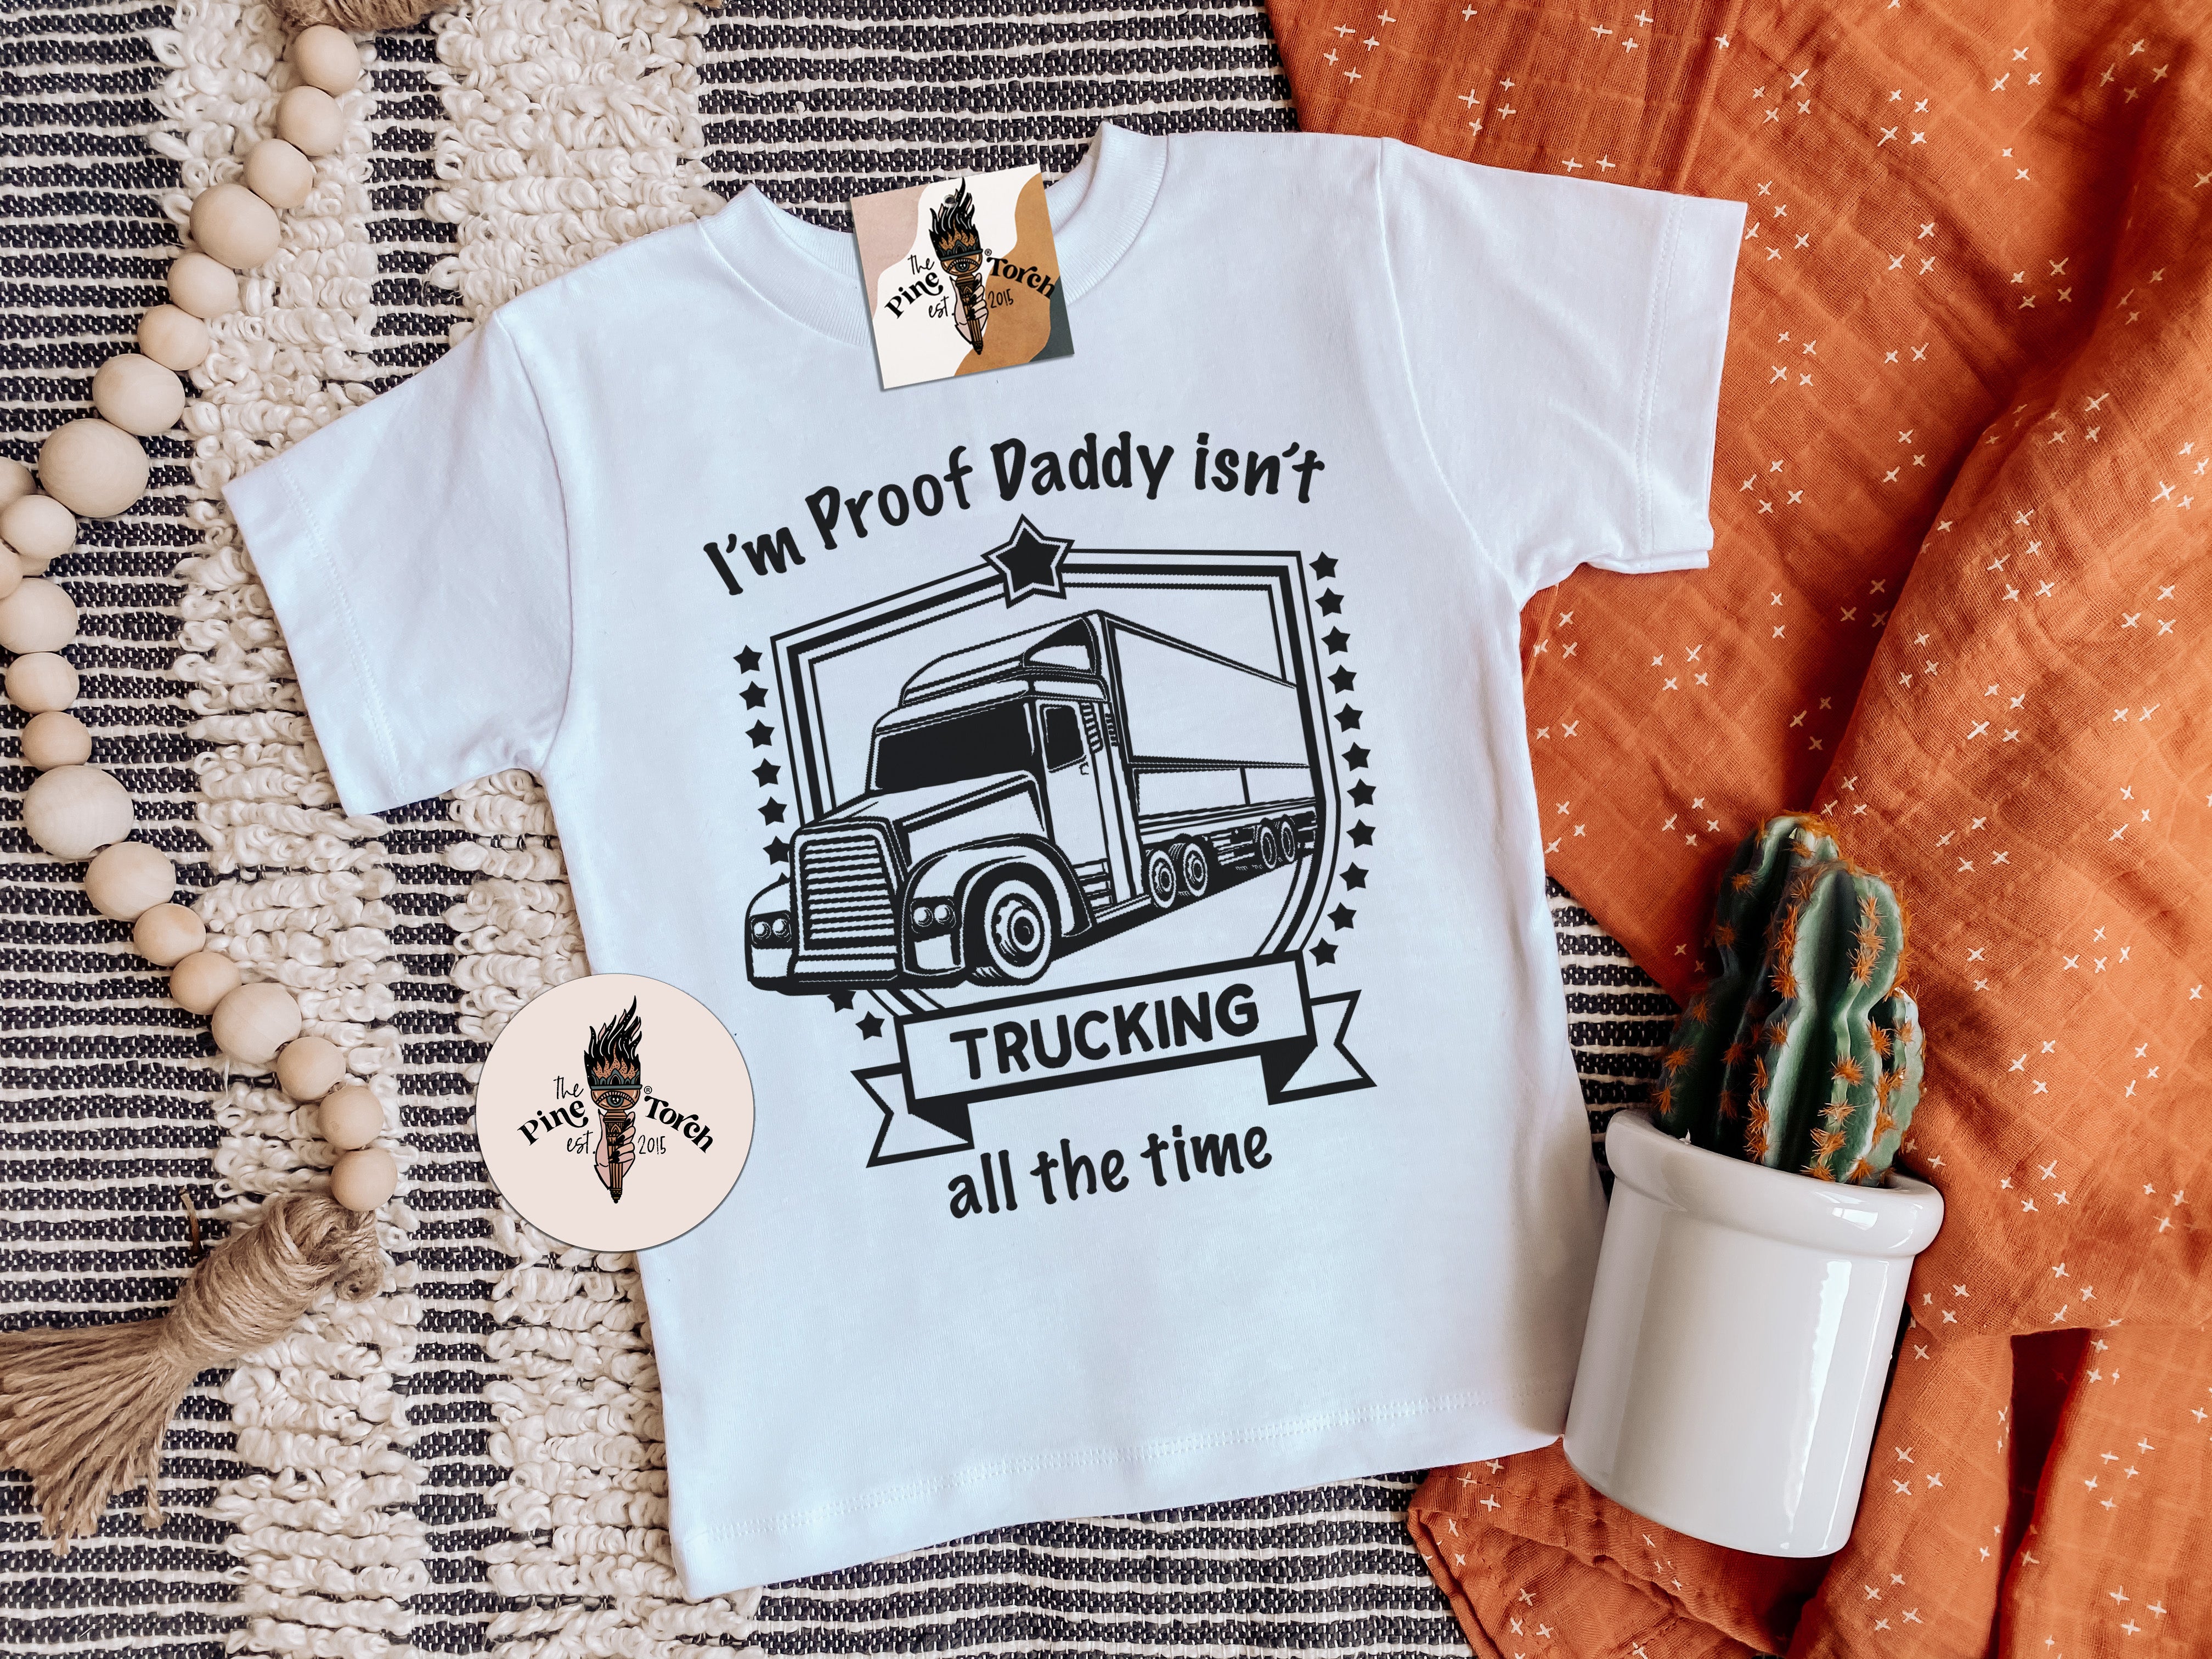 « I'M PROOF DADDY ISN'T TRUCKING ALL THE TIME » KID'S TEE